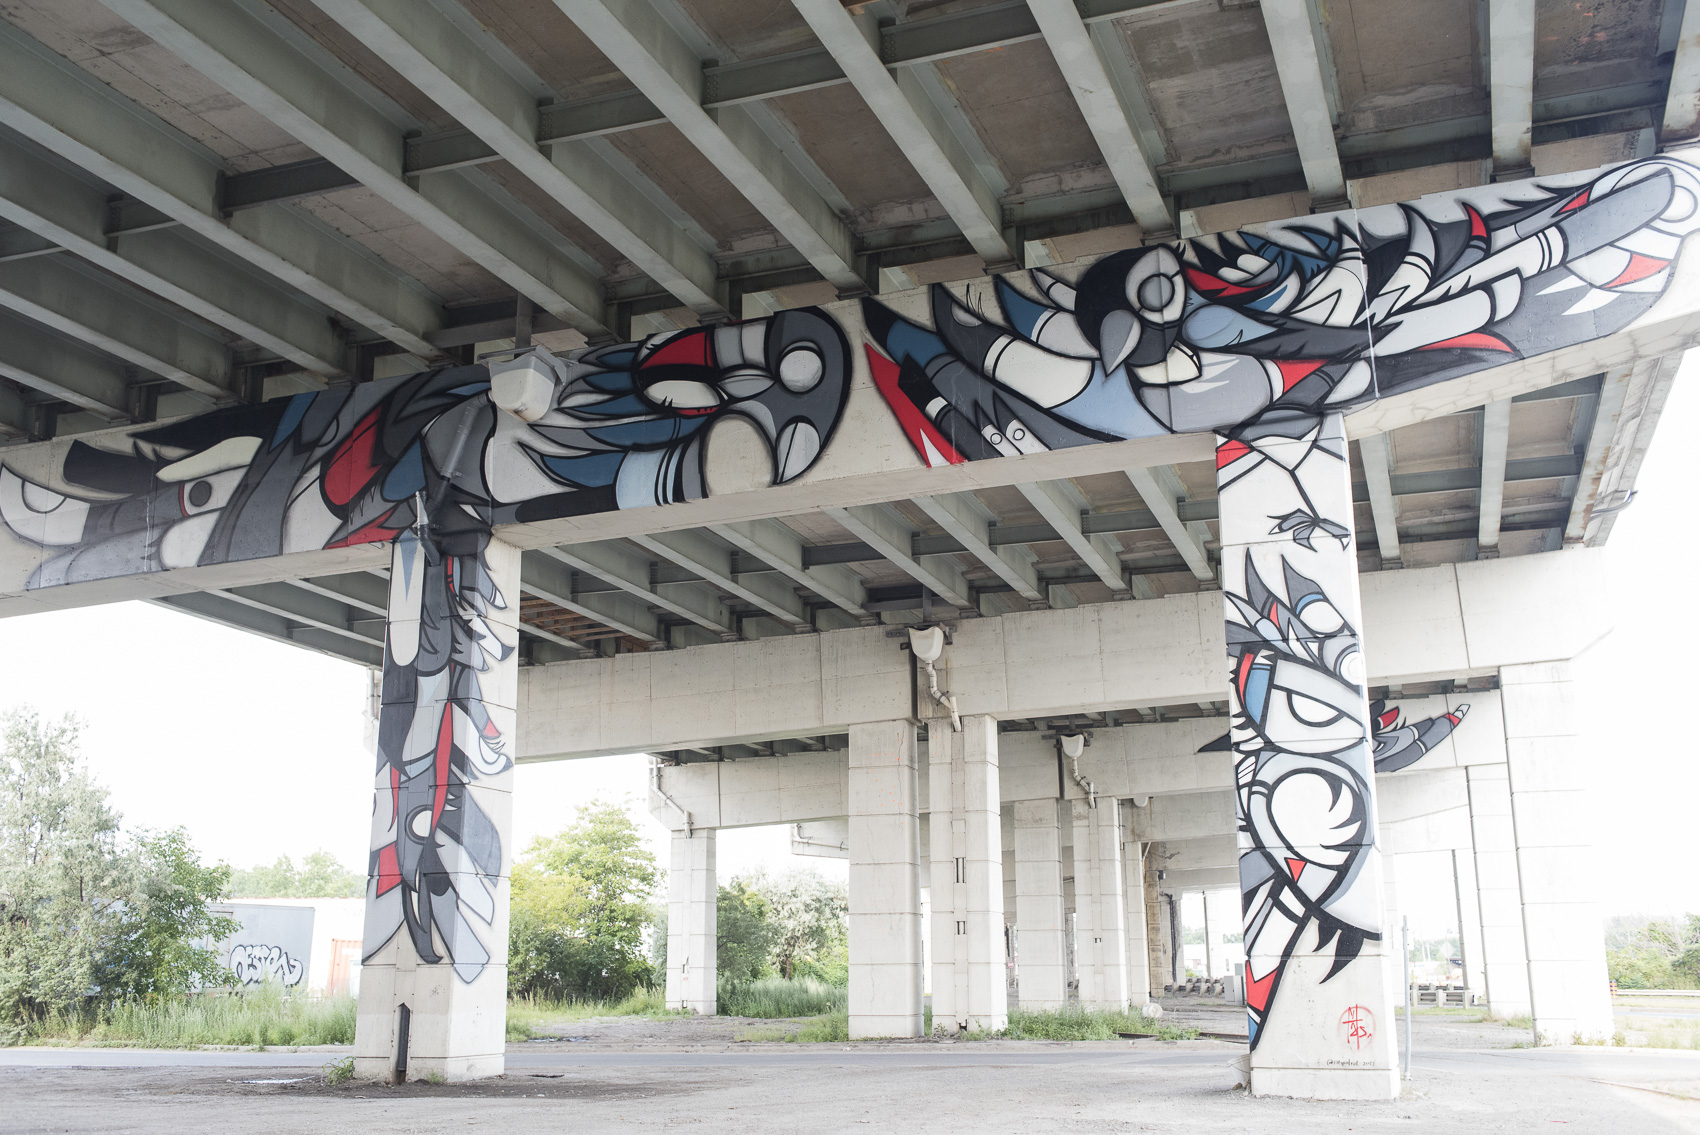 A large mural under Toronto's Gardiner highway by Fatspatrol. The mural showcases bird imagery